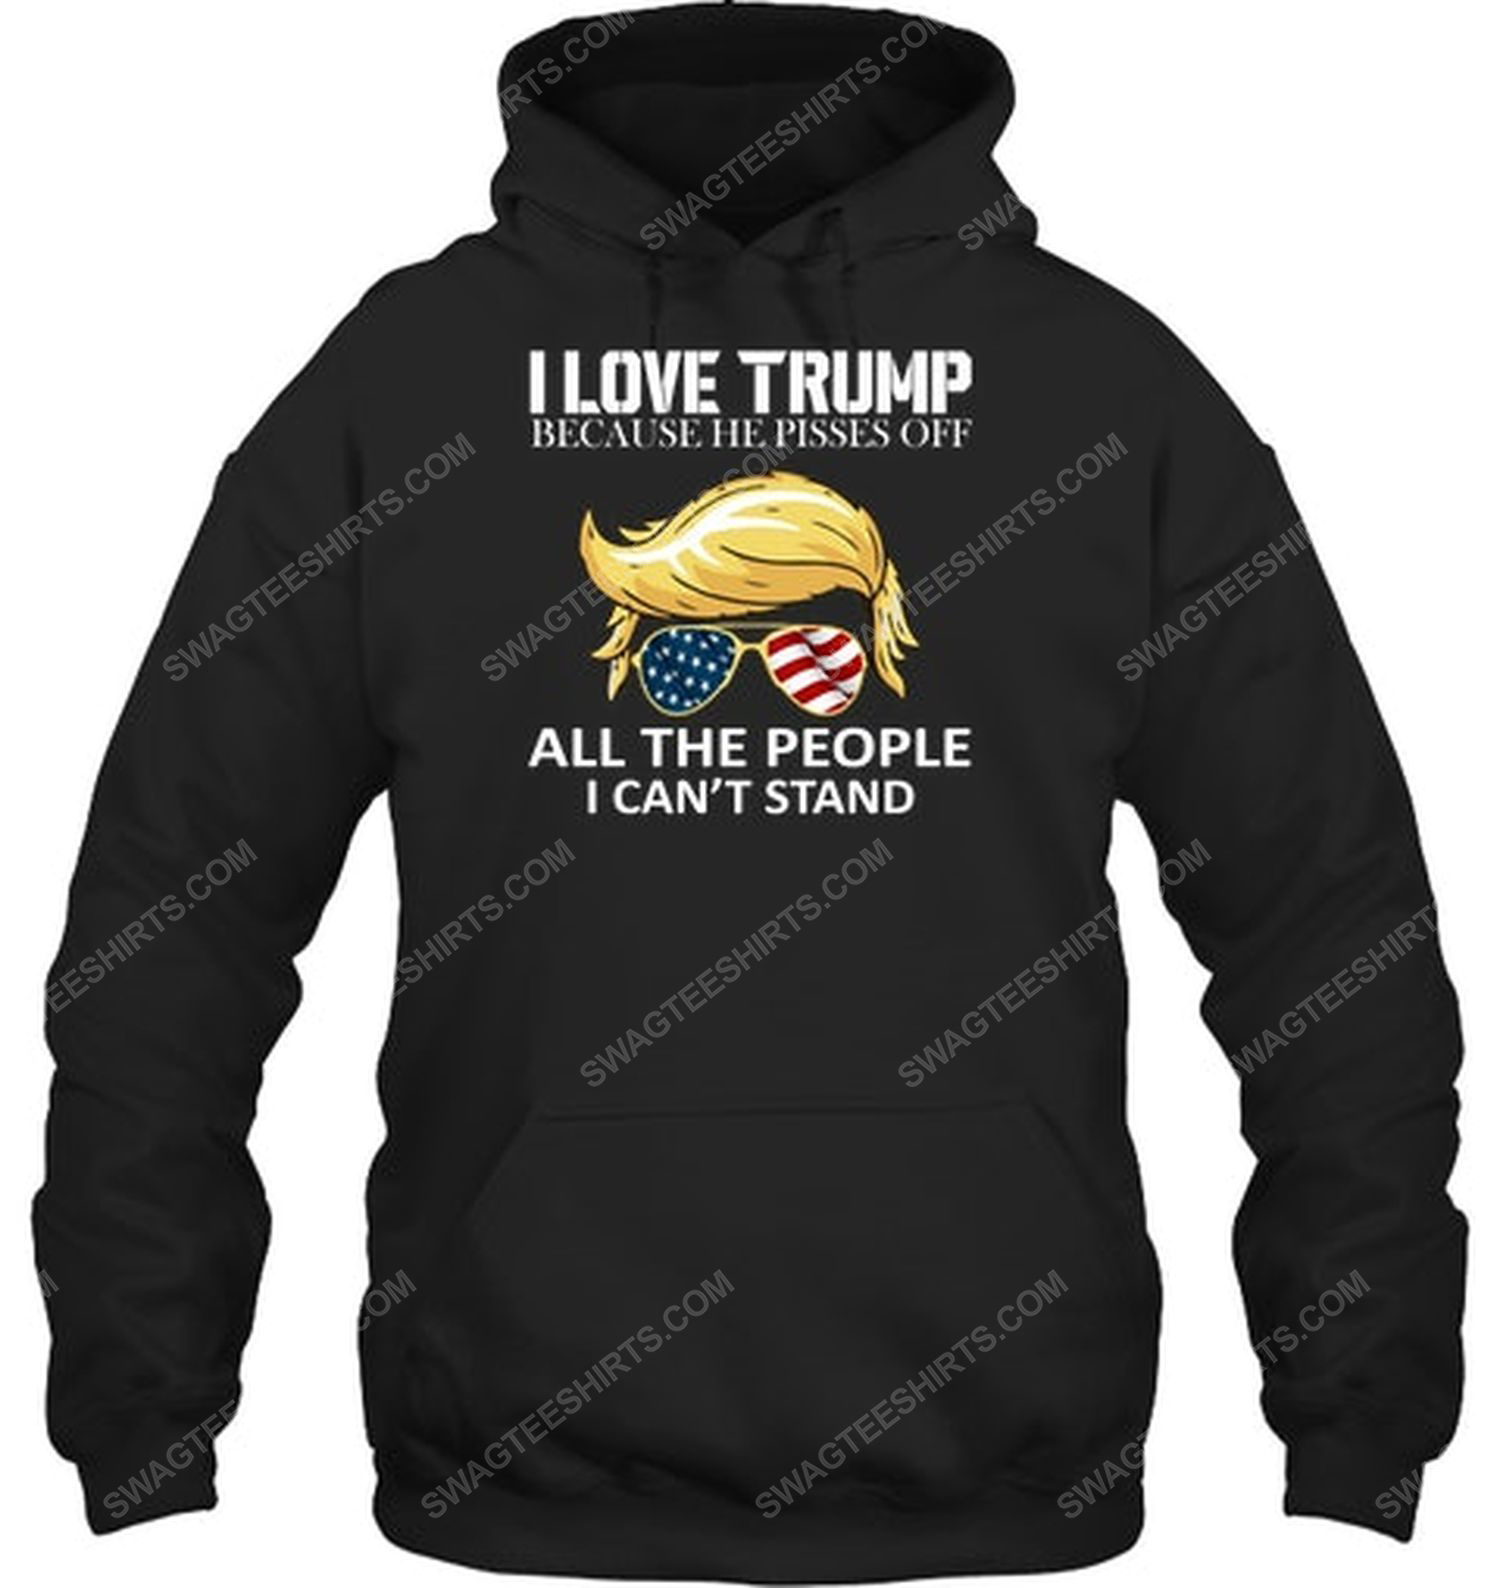 I love trump because he pisses off all the people i can't stand political hoodie